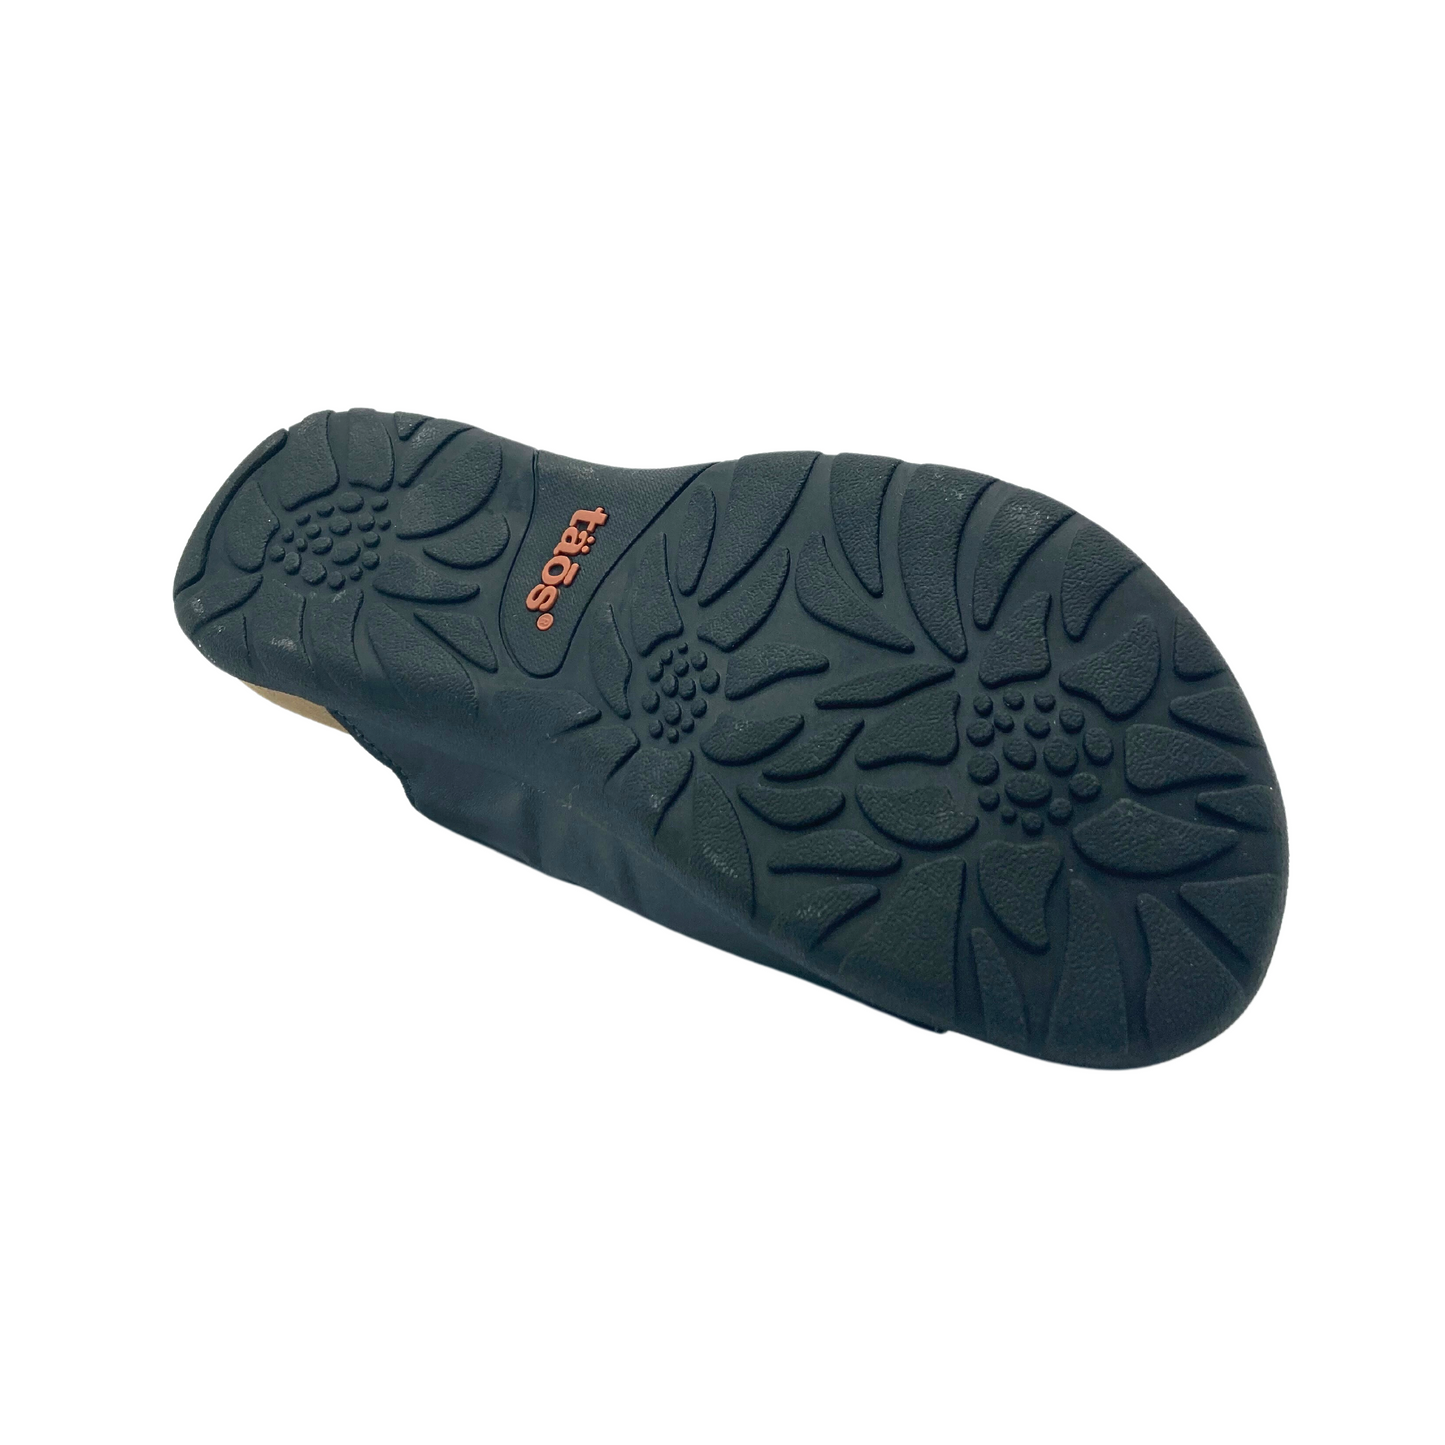 Bottom shot of sole of Taos Gift 2 sandal.  Nice rugged rubber sole makes it great for any road conditions